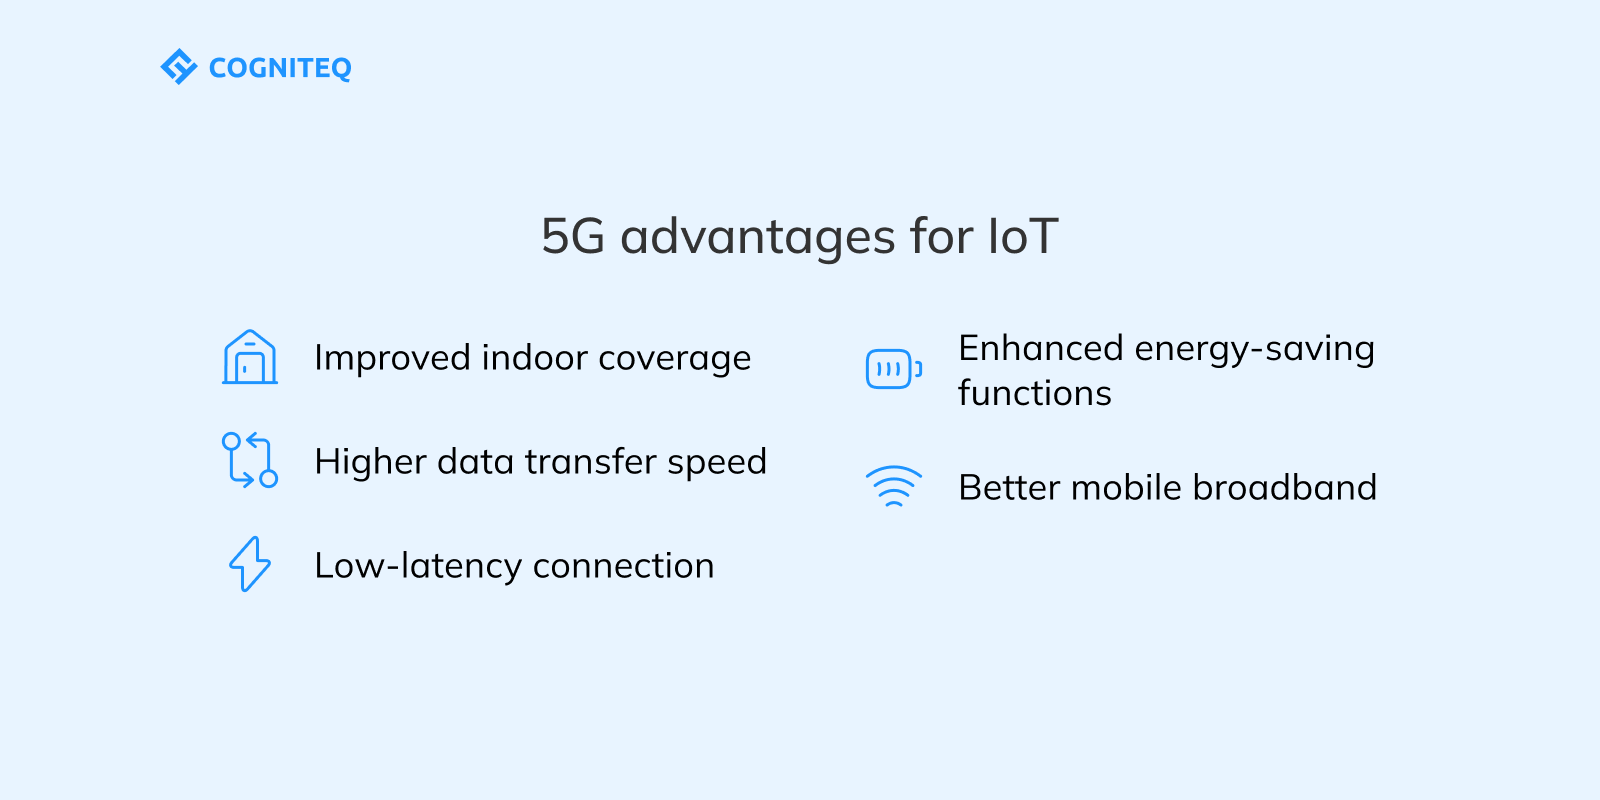 What benefits for IoT does this wireless technology have?